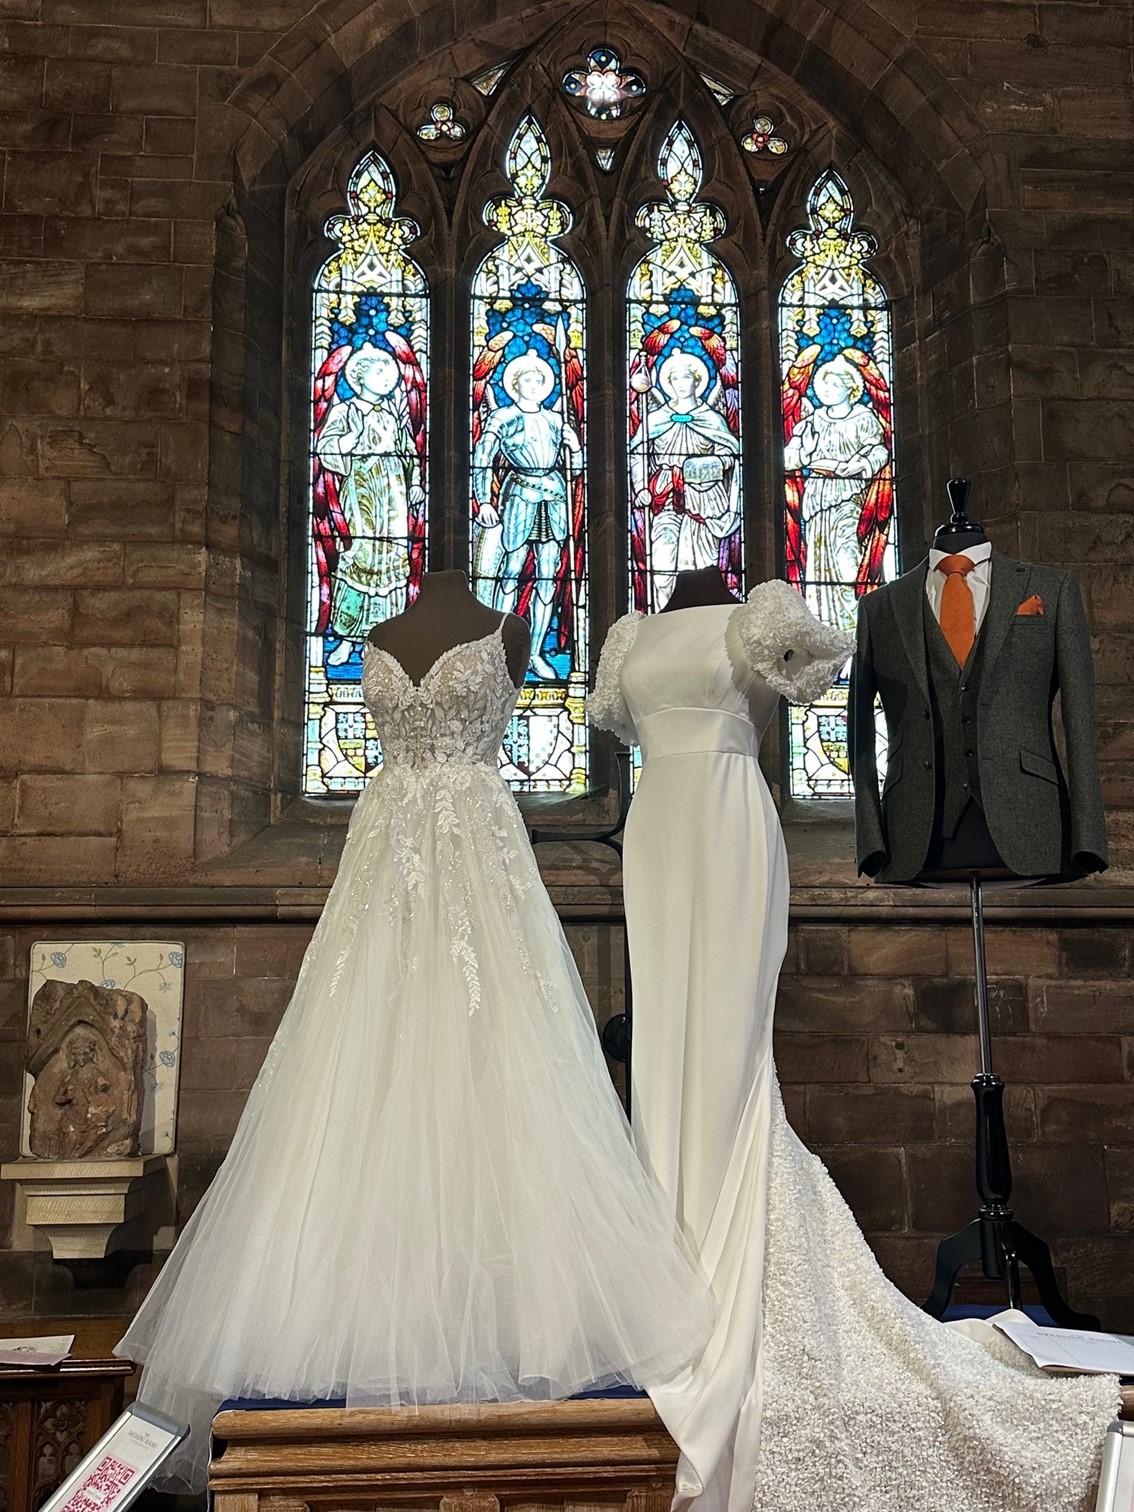 Two vintage wedding dresses and a wedding suit